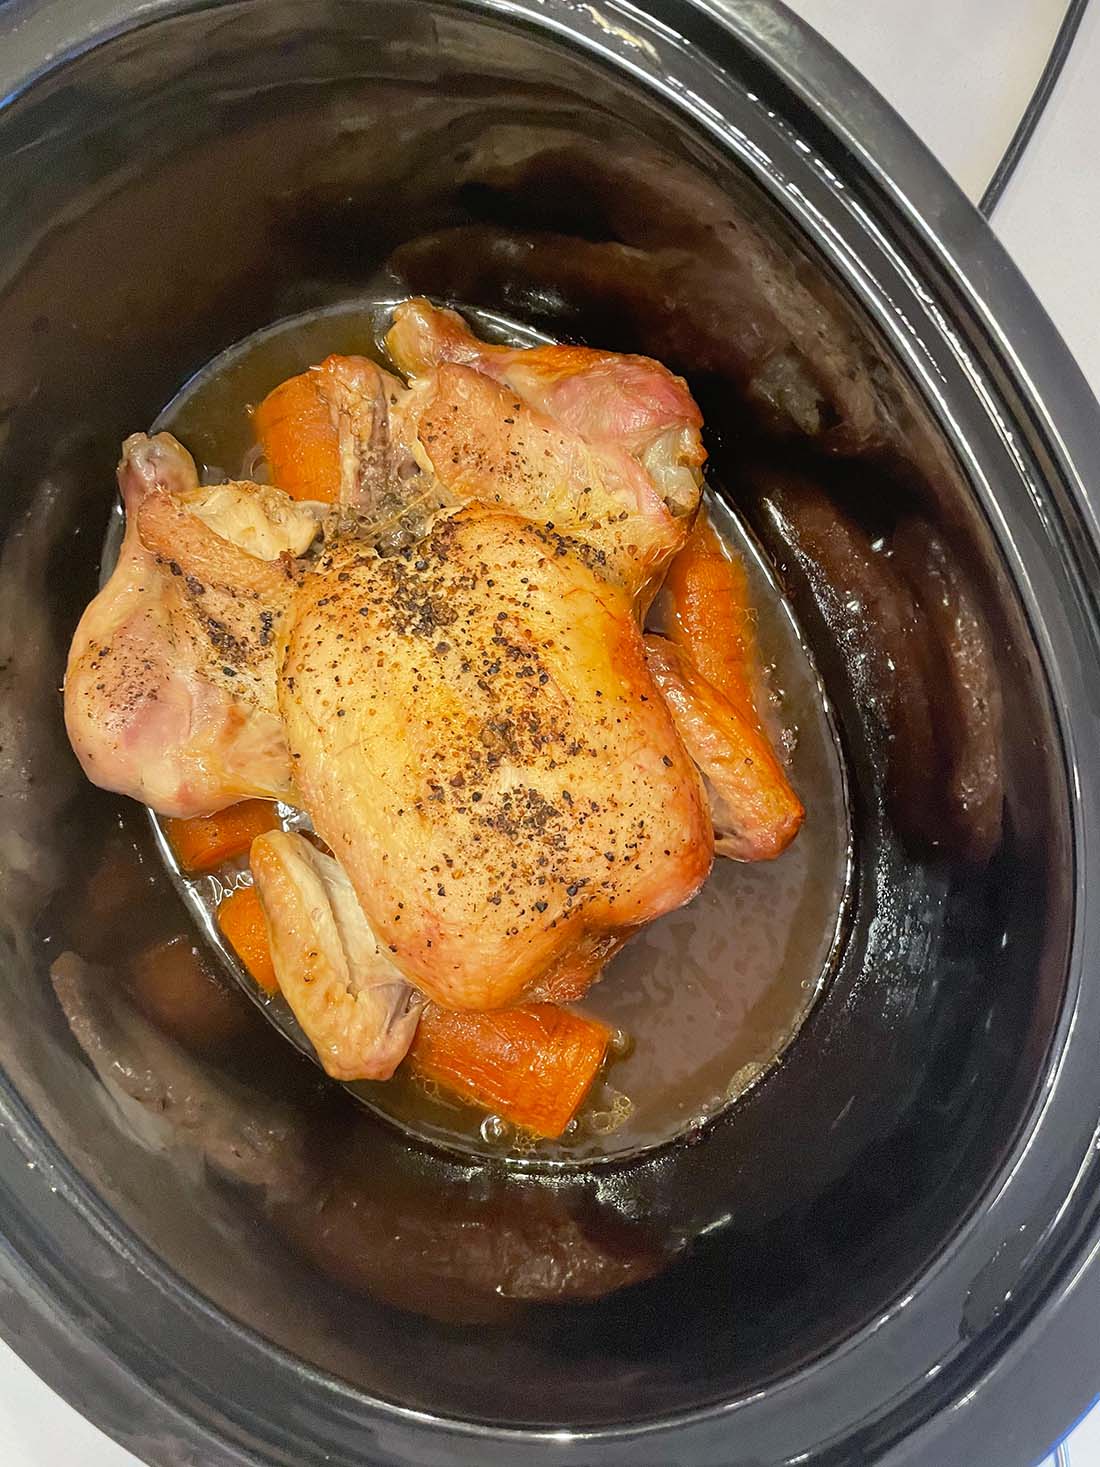 Use a large slow cooker as this will cook down the moisture but retaining the moistness of the chicken